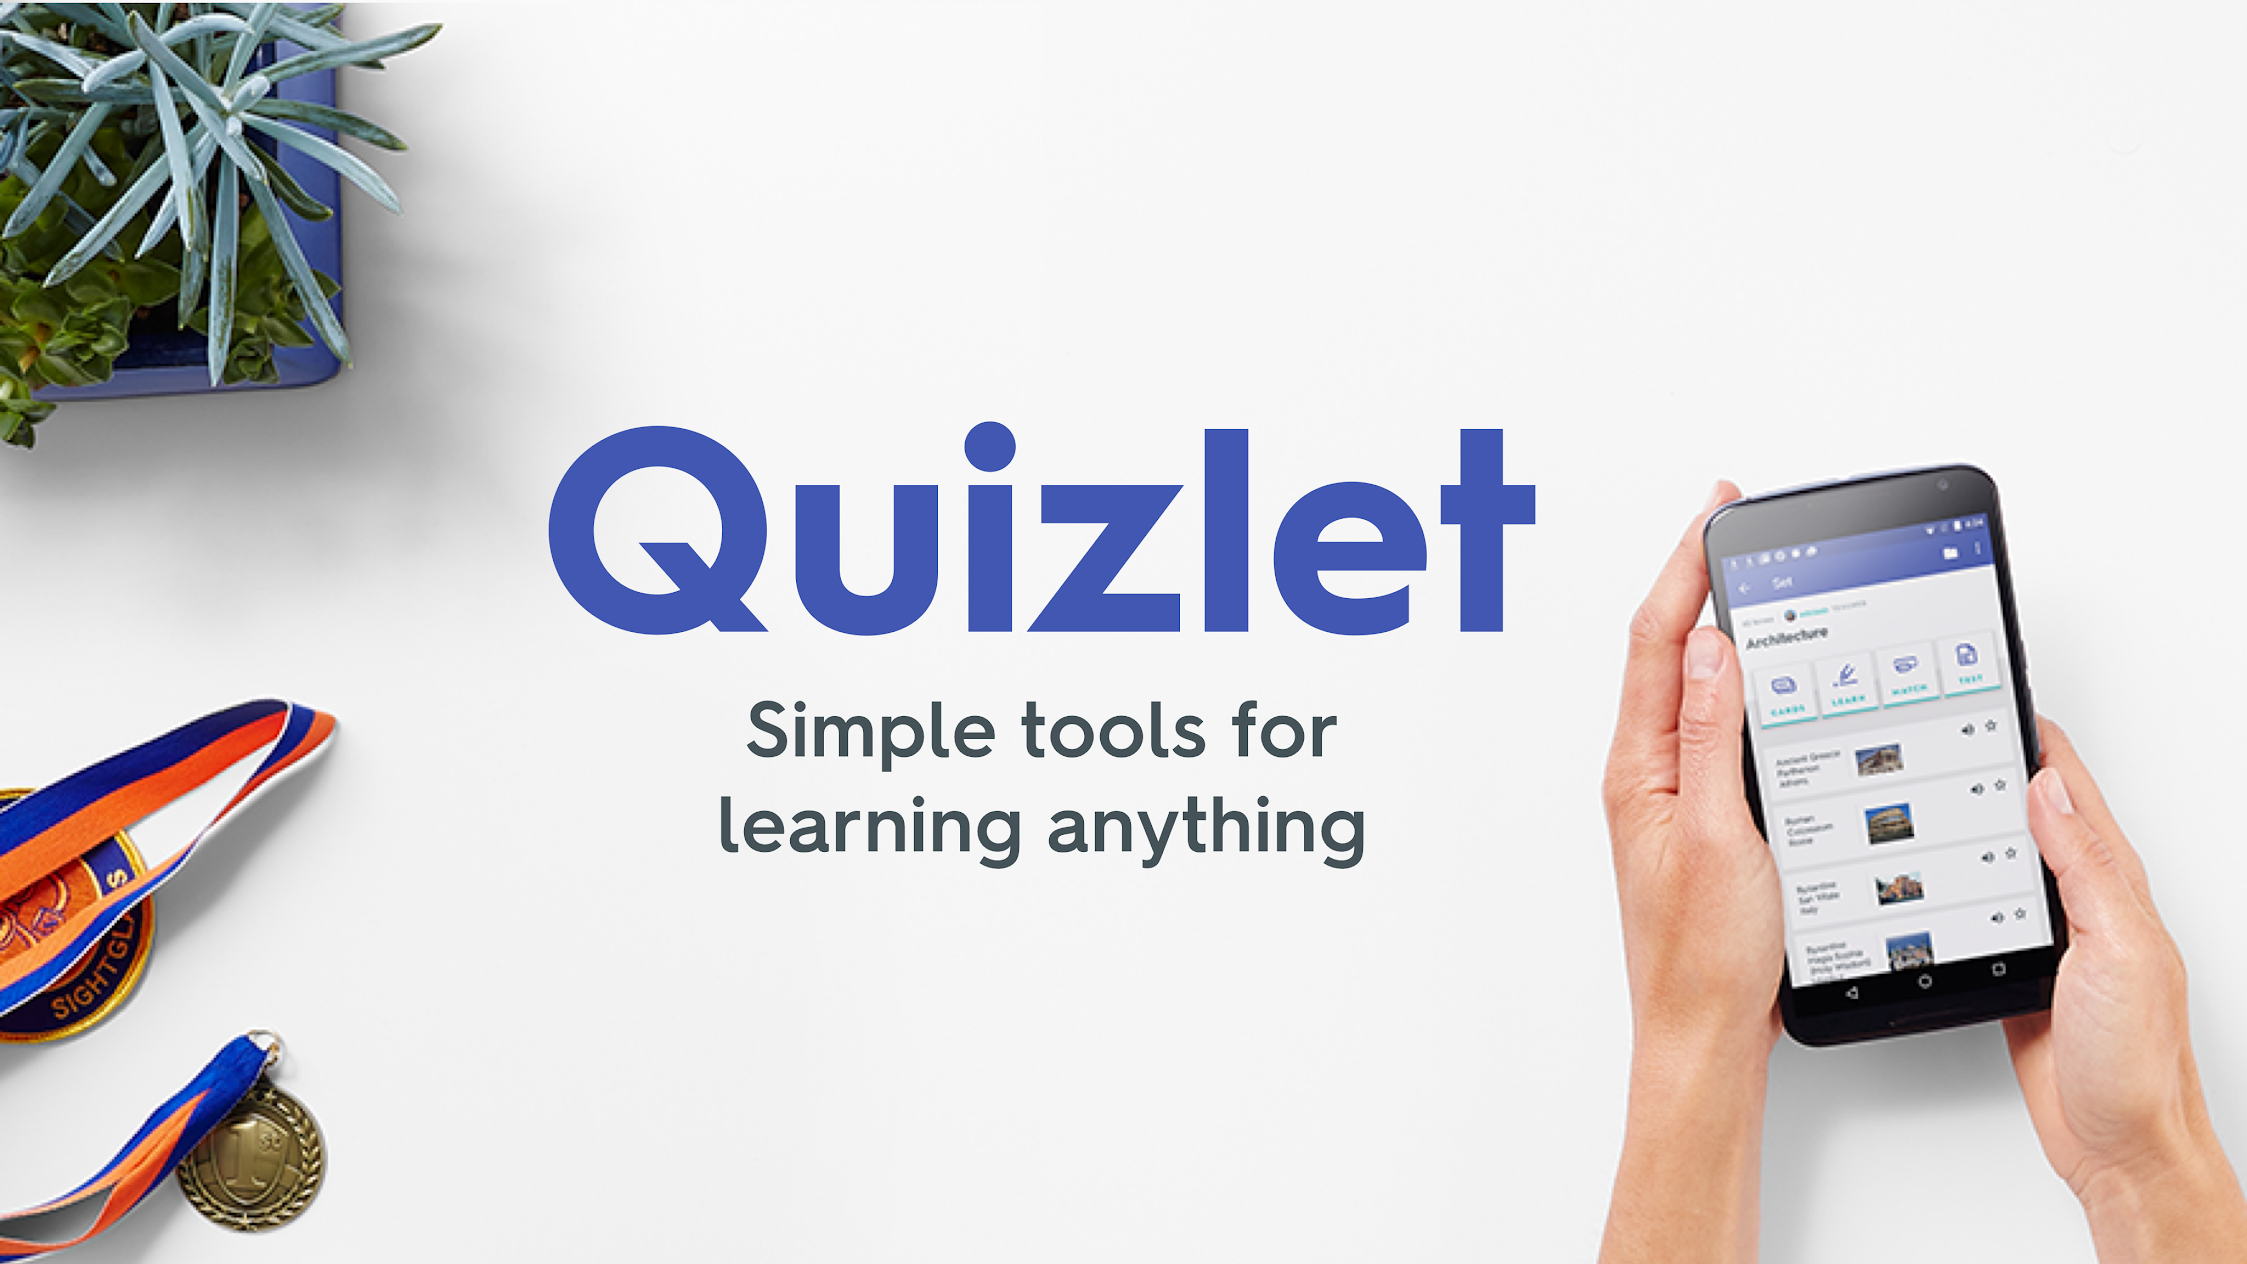 Android Apps by Quizlet Inc. on Google Play